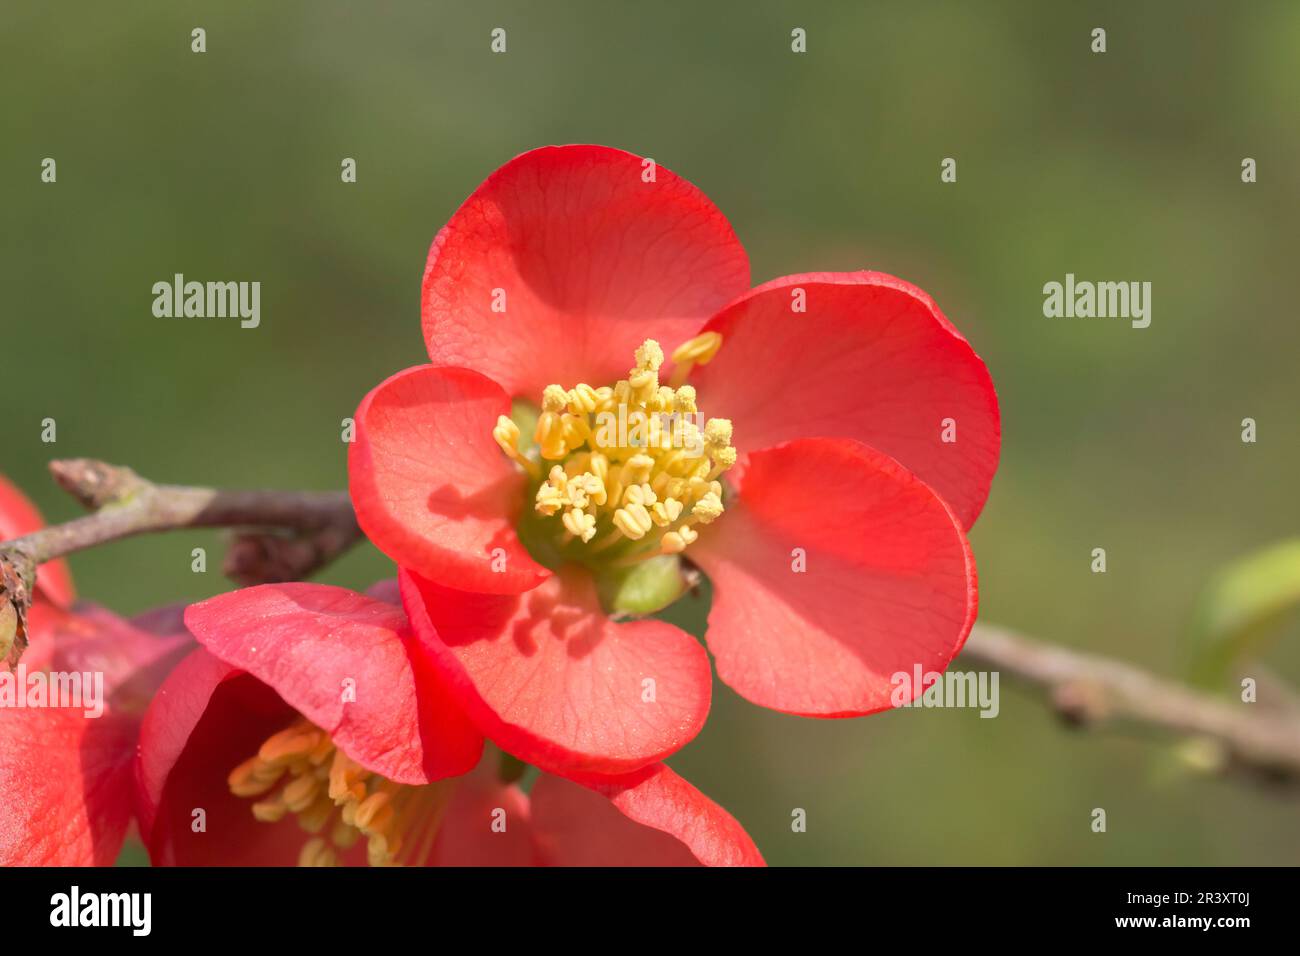 Chaenomeles japonica, known as Japanese quince, Quince, Flowering quince Stock Photo